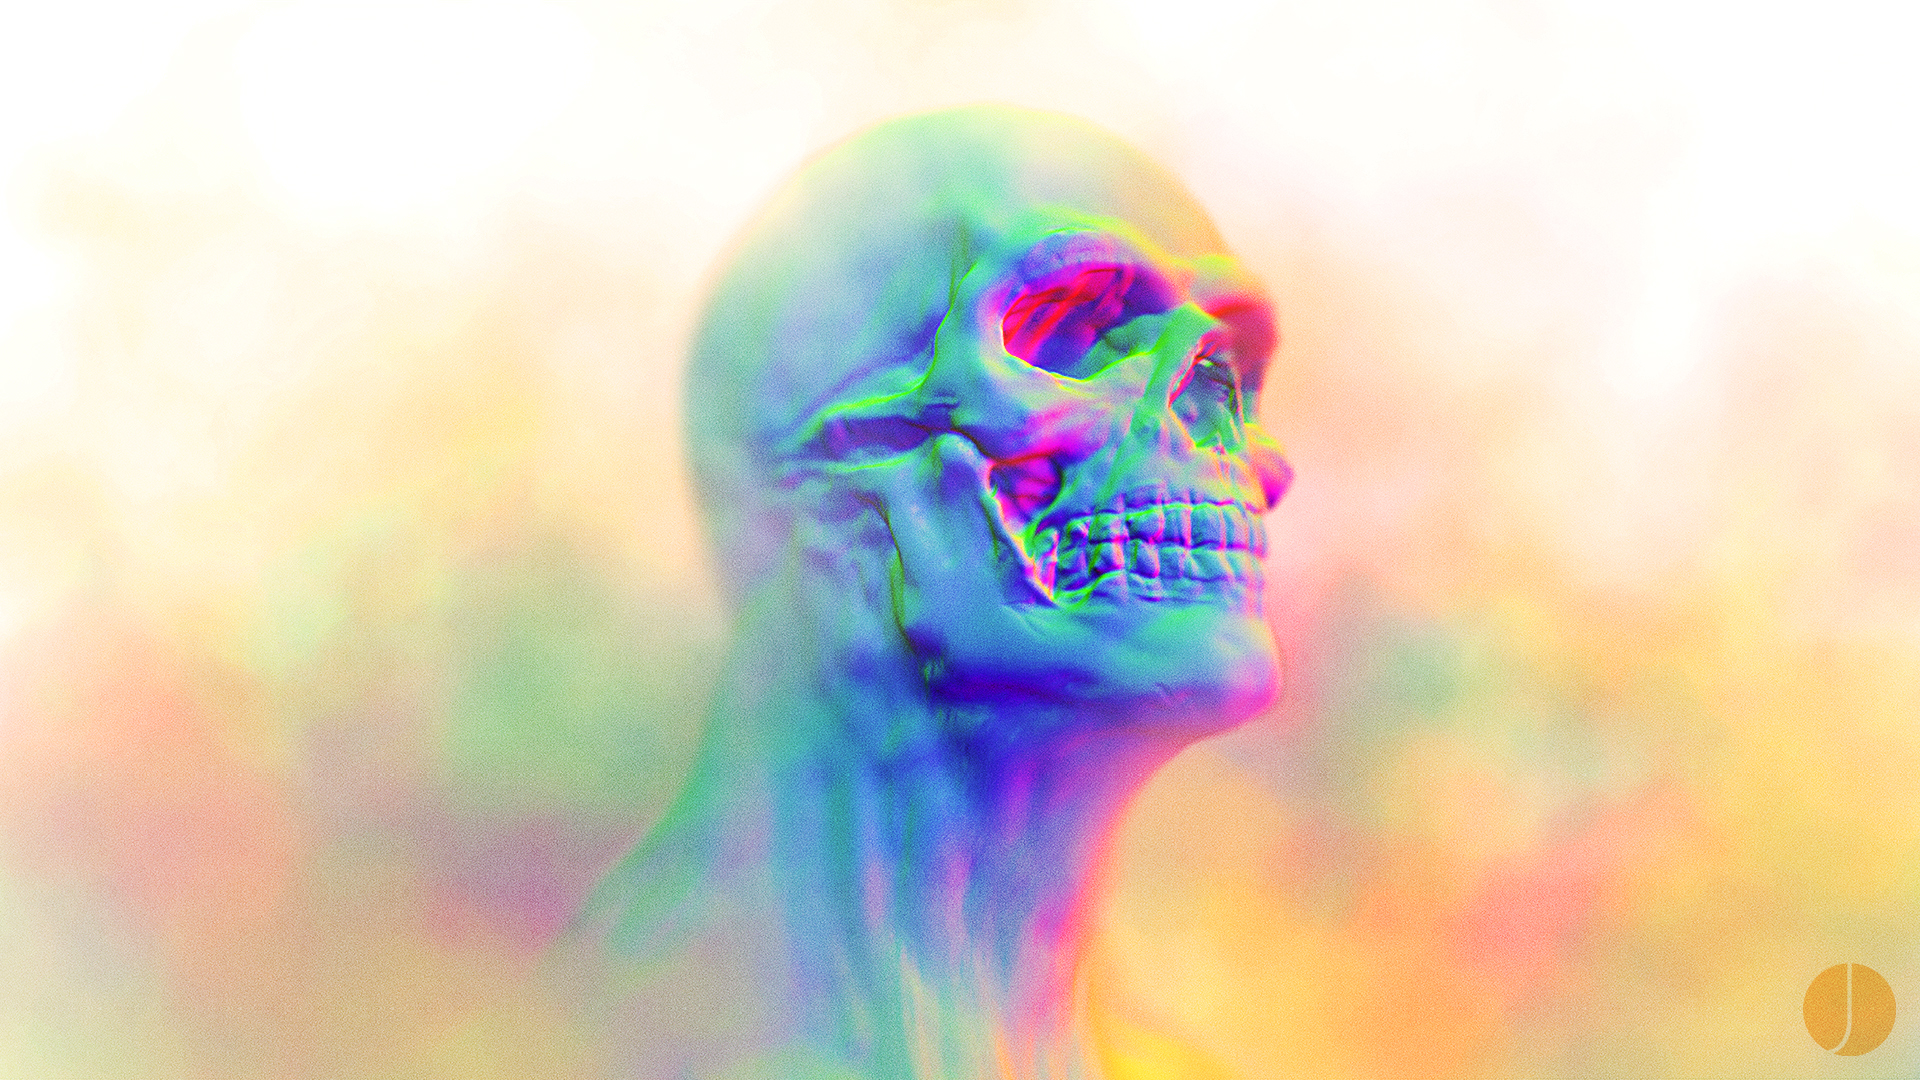 Skull Candy Wallpaper Colorful Human Design